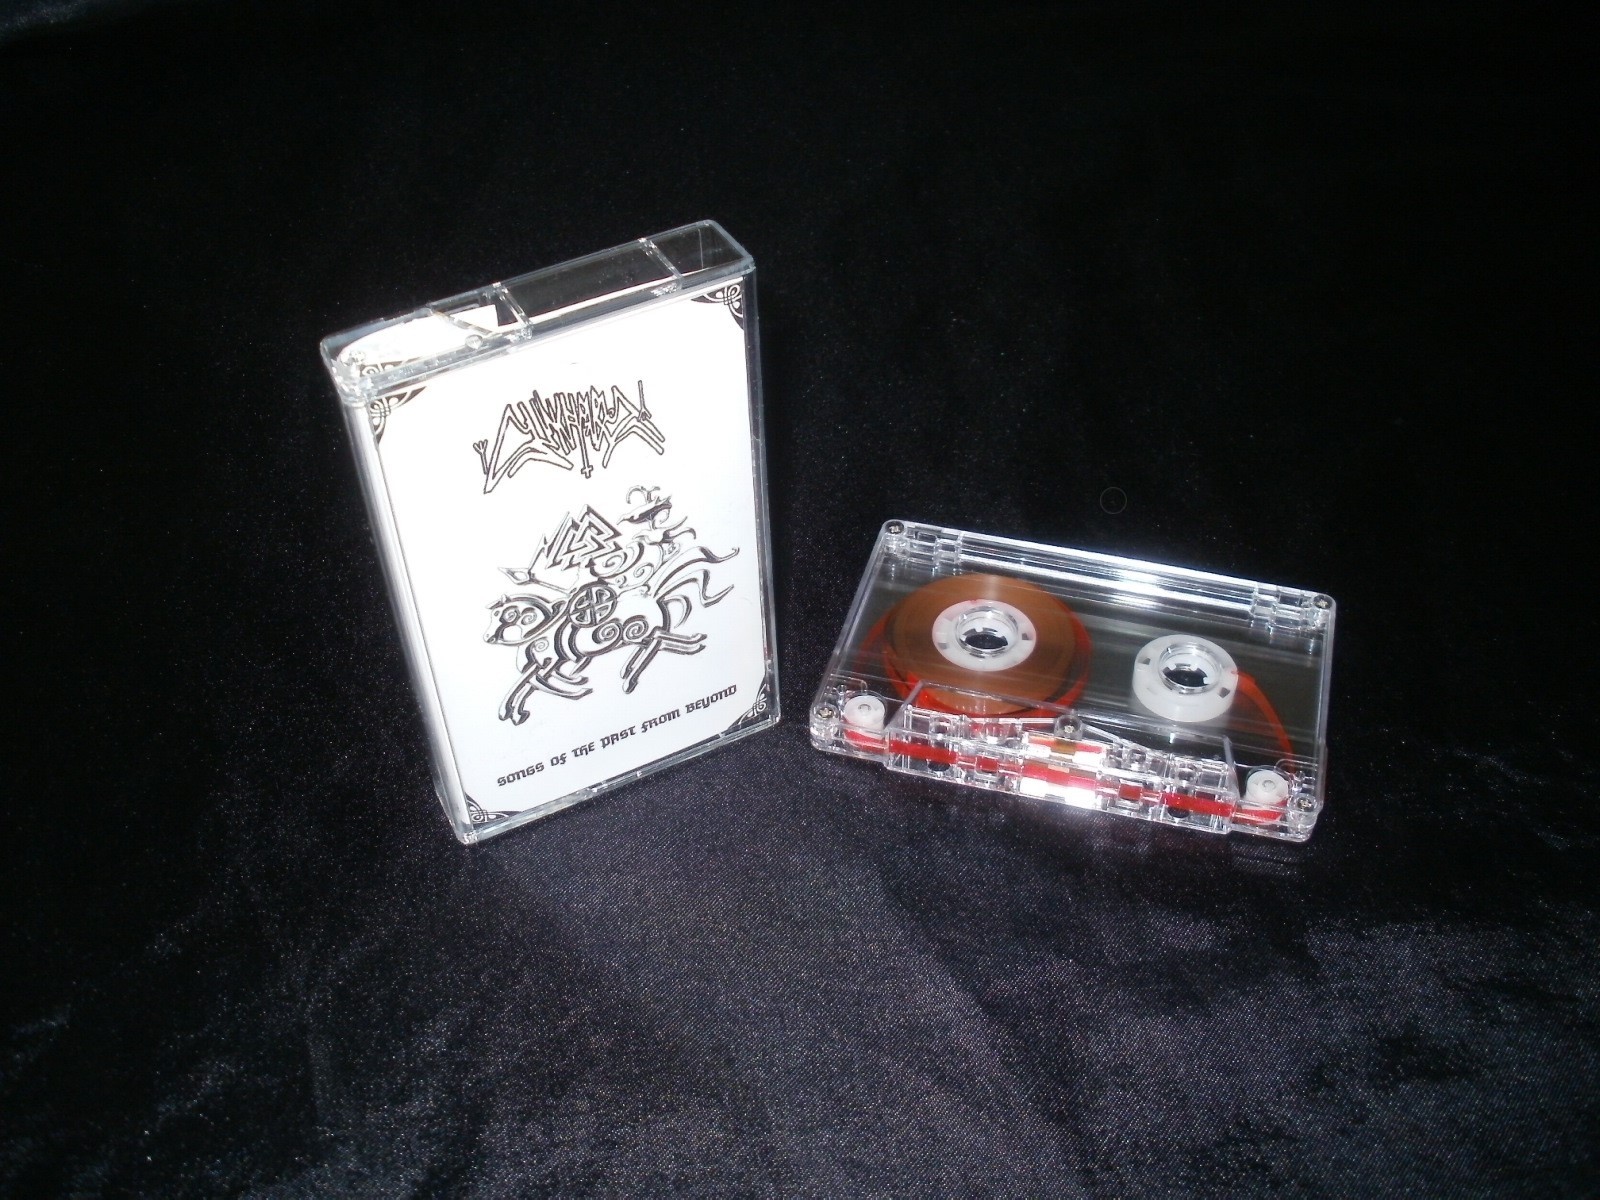 Sunchariot - Songs of the Past from Beyond Tape